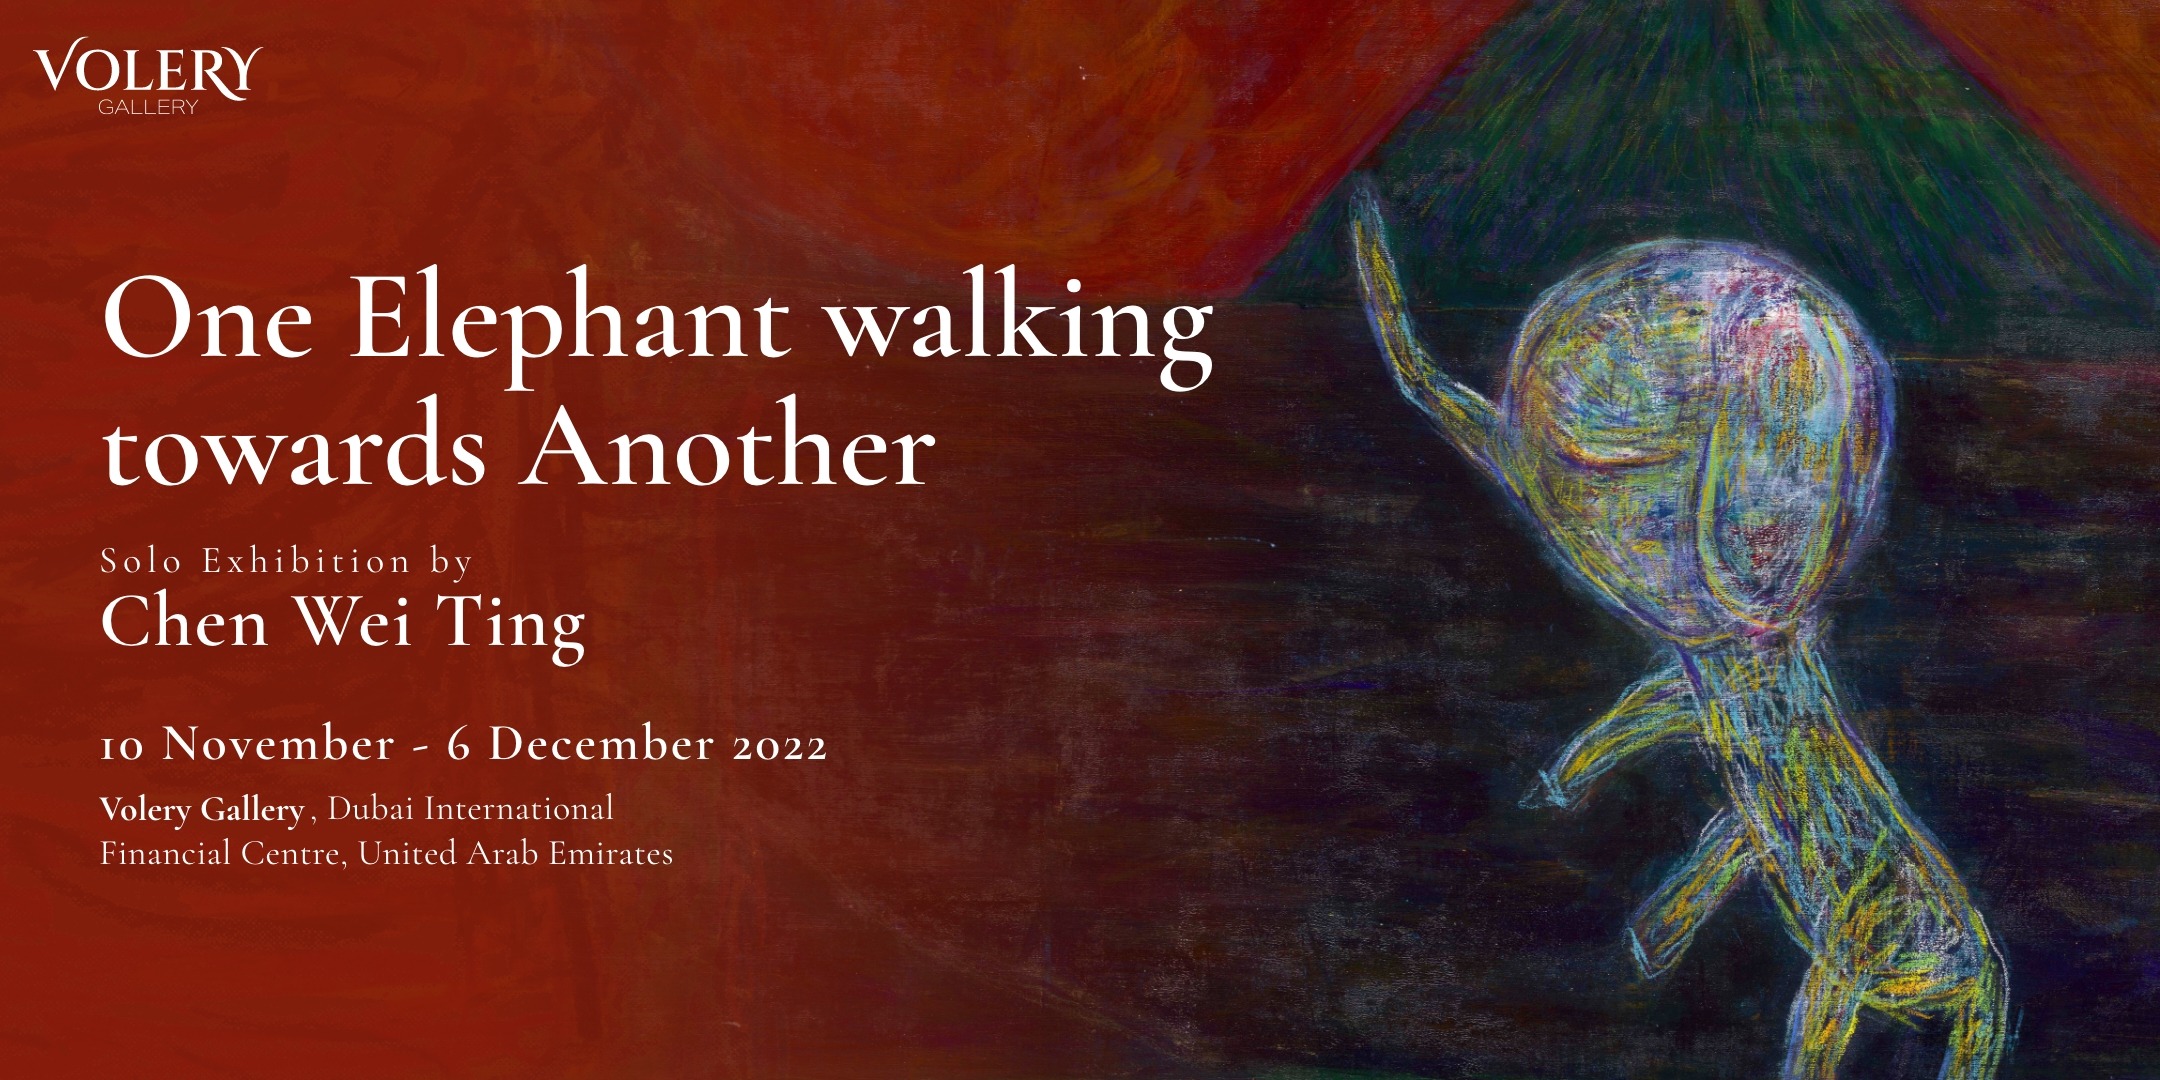 One Elephant walking towards Another Exhibition - Coming Soon in UAE